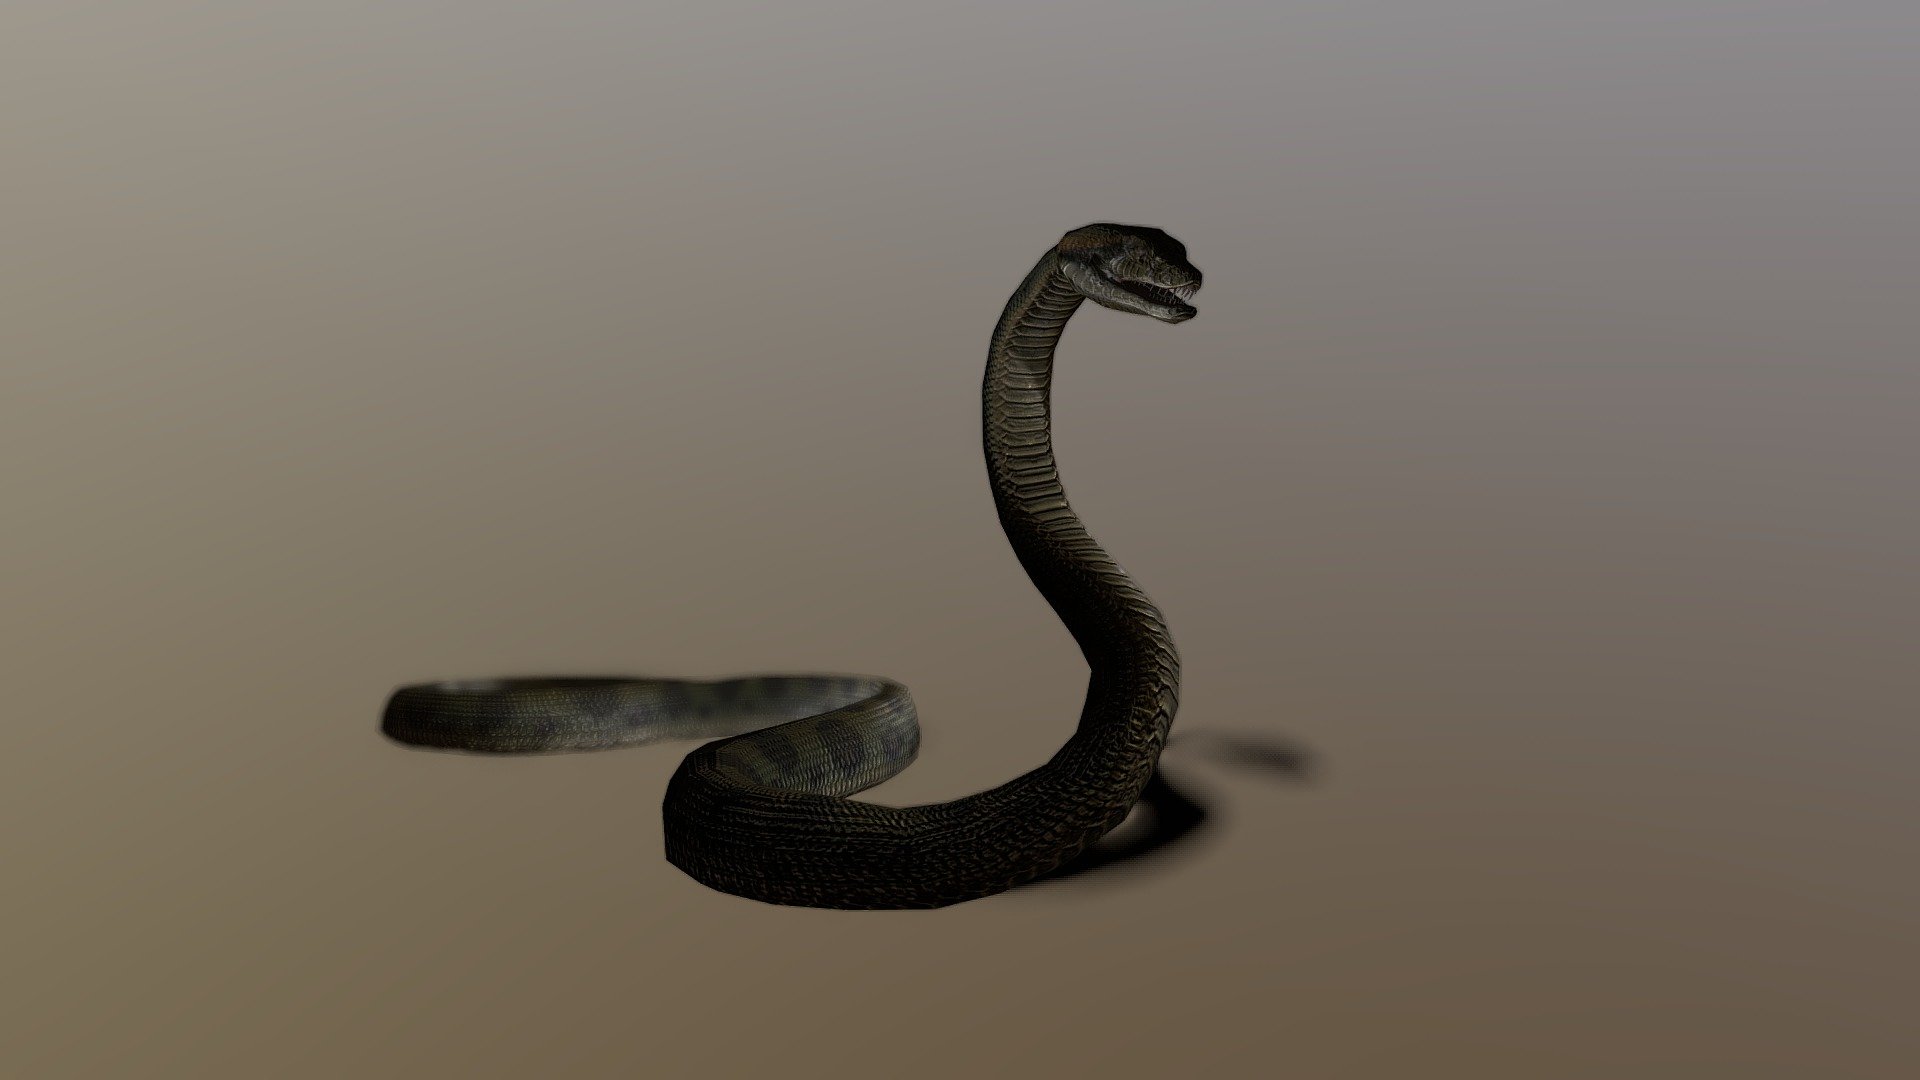 The most biggest and longest snake ever encountered. This snake can eat a whole deer in one swallow. The word eunectes murinus is a scientific name for green anaconda.

WARNING
THIS SNAKE CAN SWALLOW A PERSON AND IT IS REALLY REAL BE SAFE! - Eunectes Murinus - 3D model by ArachnoBoy (@vang807) 3d model